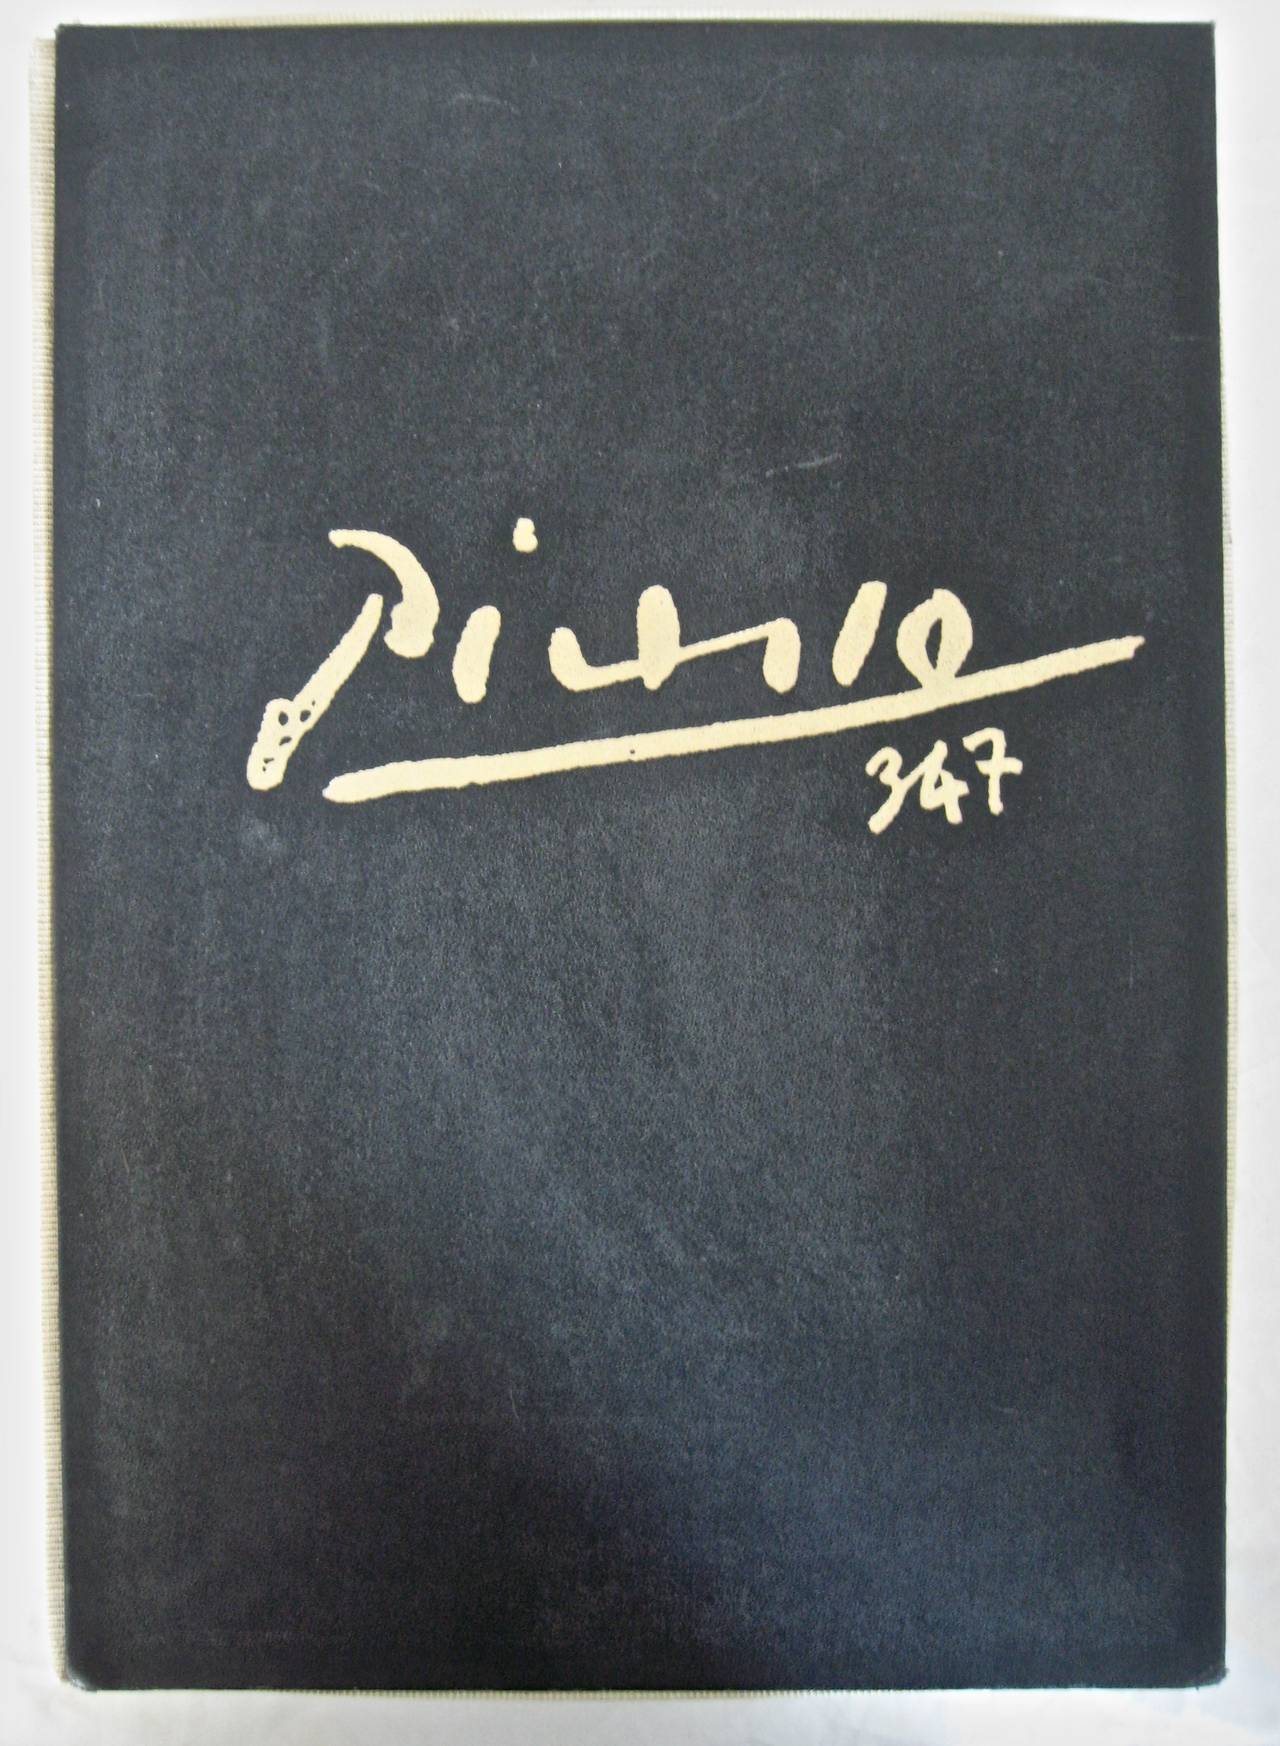 Picasso 347 Double Volume Catalog at 1stdibs